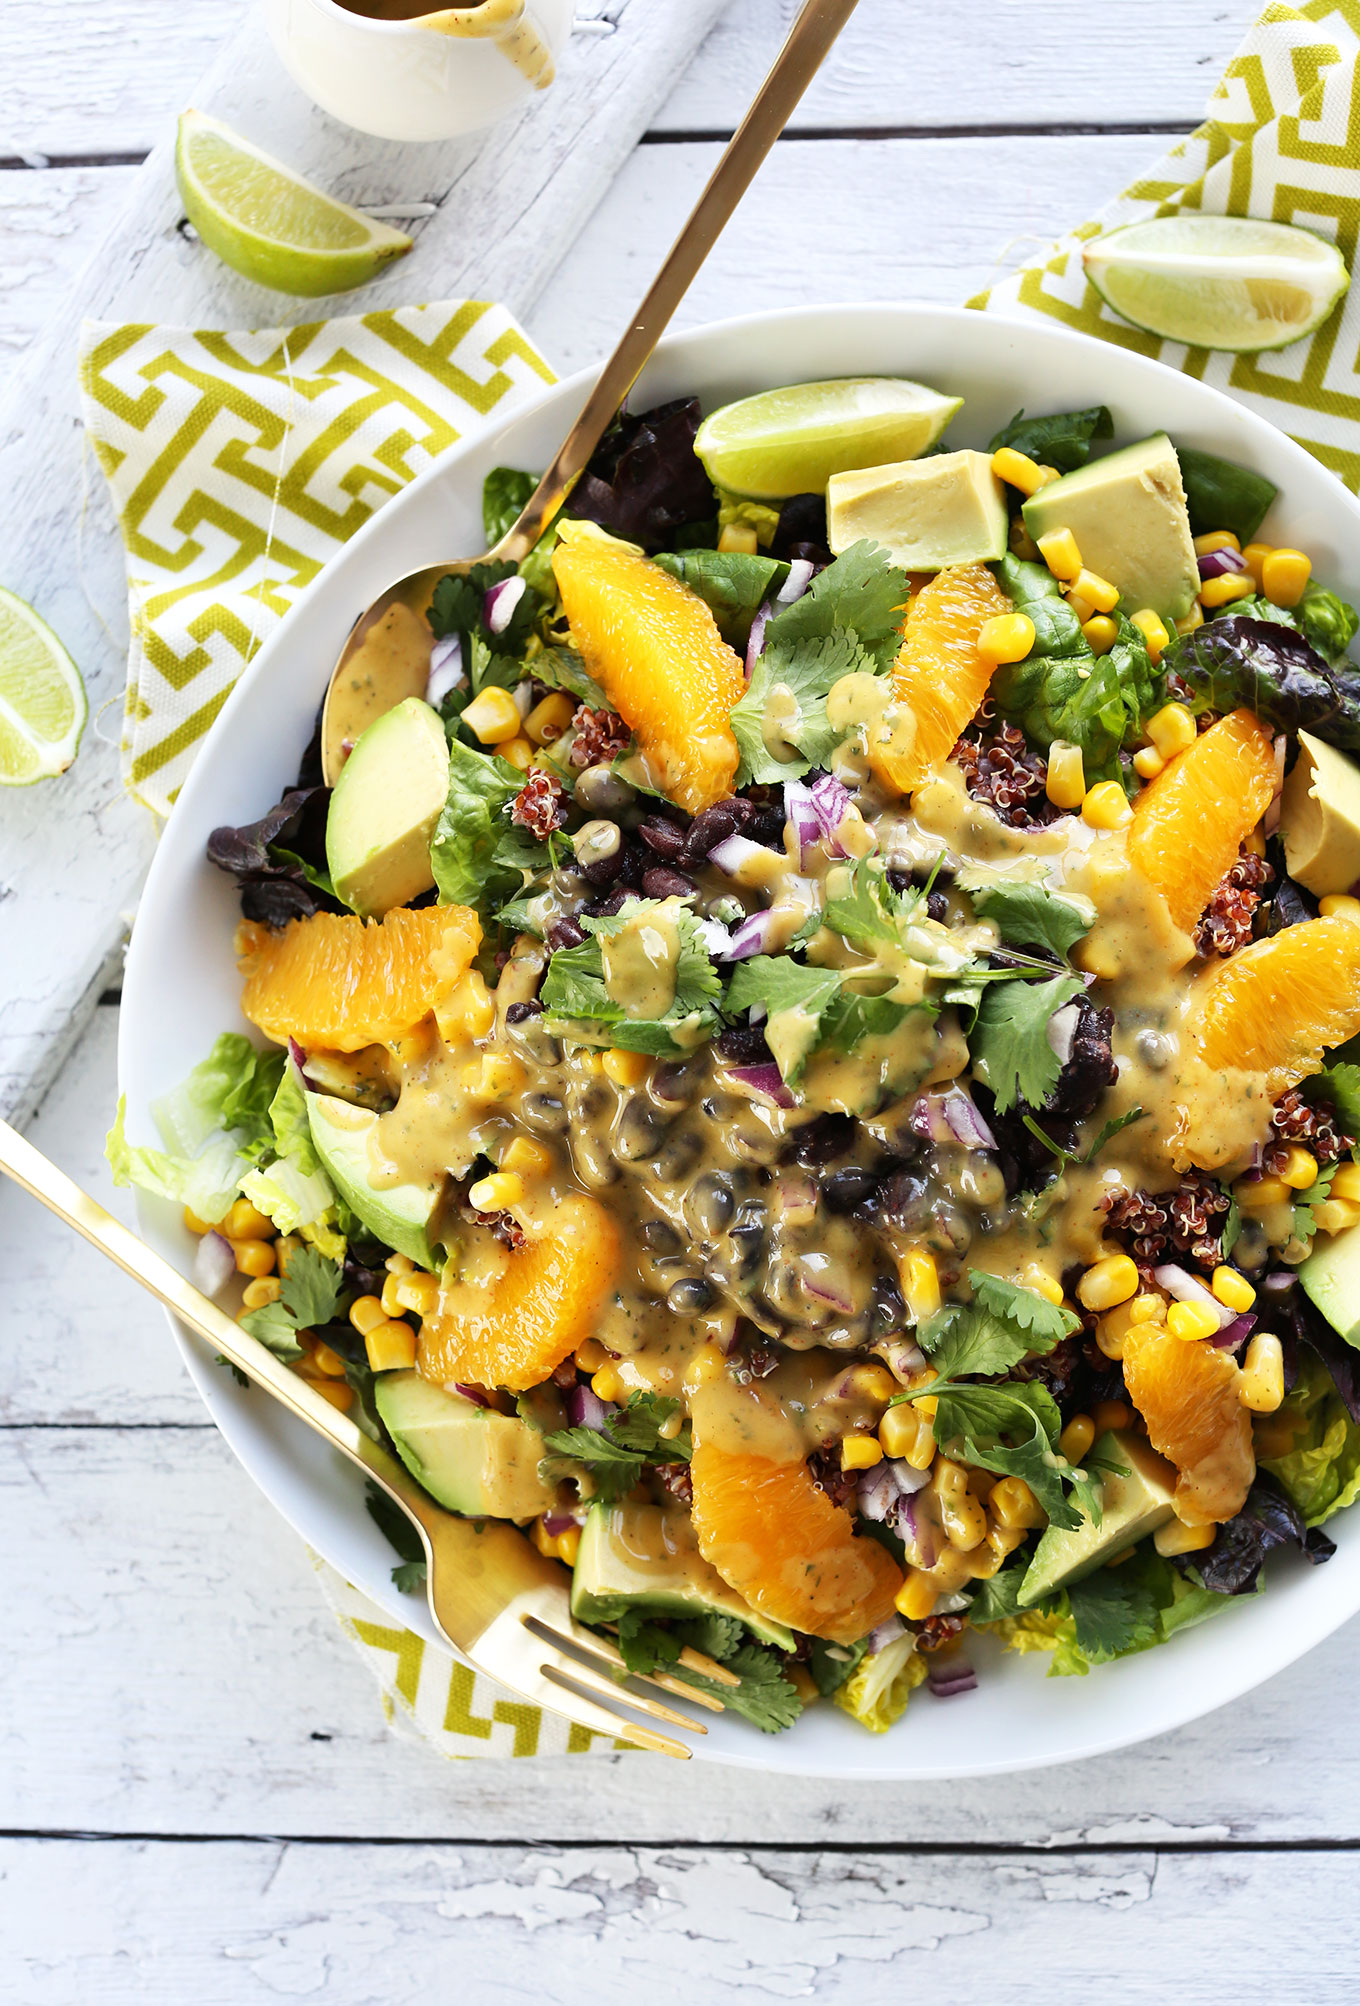 Big dinner bowl filled with our Vegan Mexican Quinoa Salad recipe